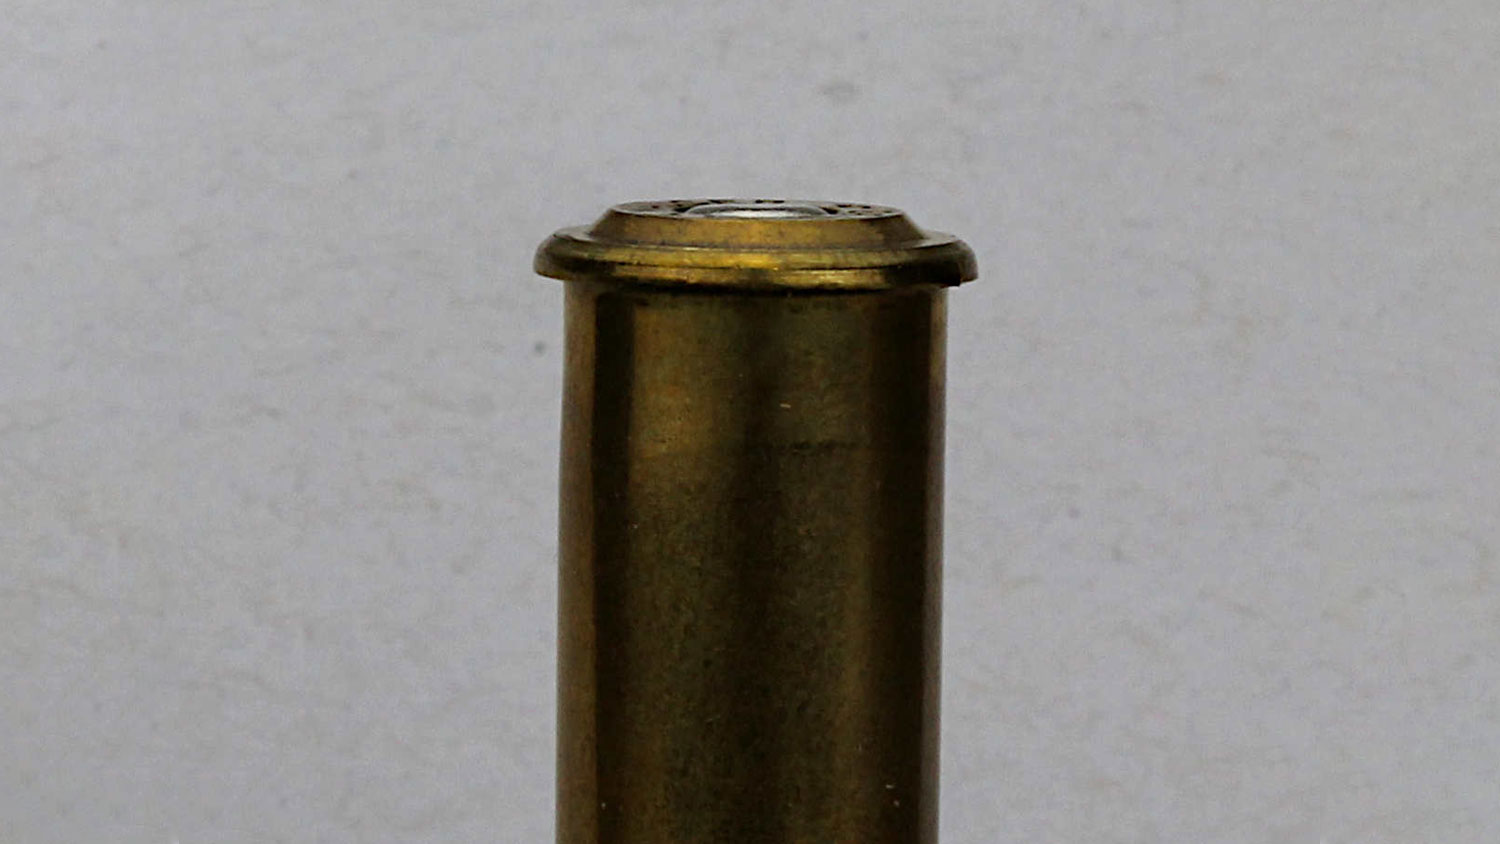 The odd raised bevel on the first Mauser cartridge’s head helped compensate for black powder fouling.